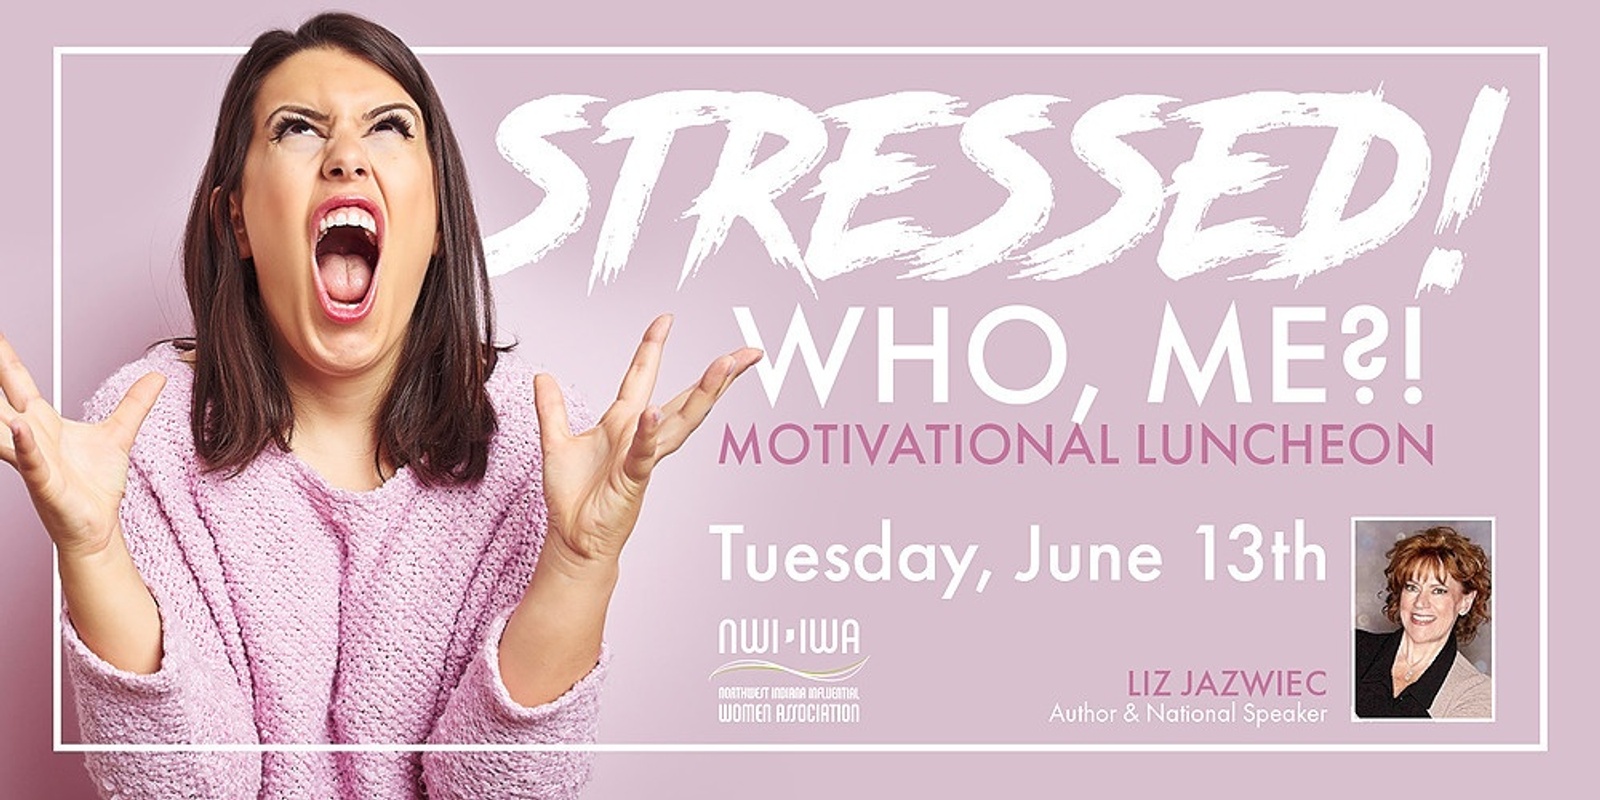 Banner image for Stressed! Who, me?! Motivational Luncheon